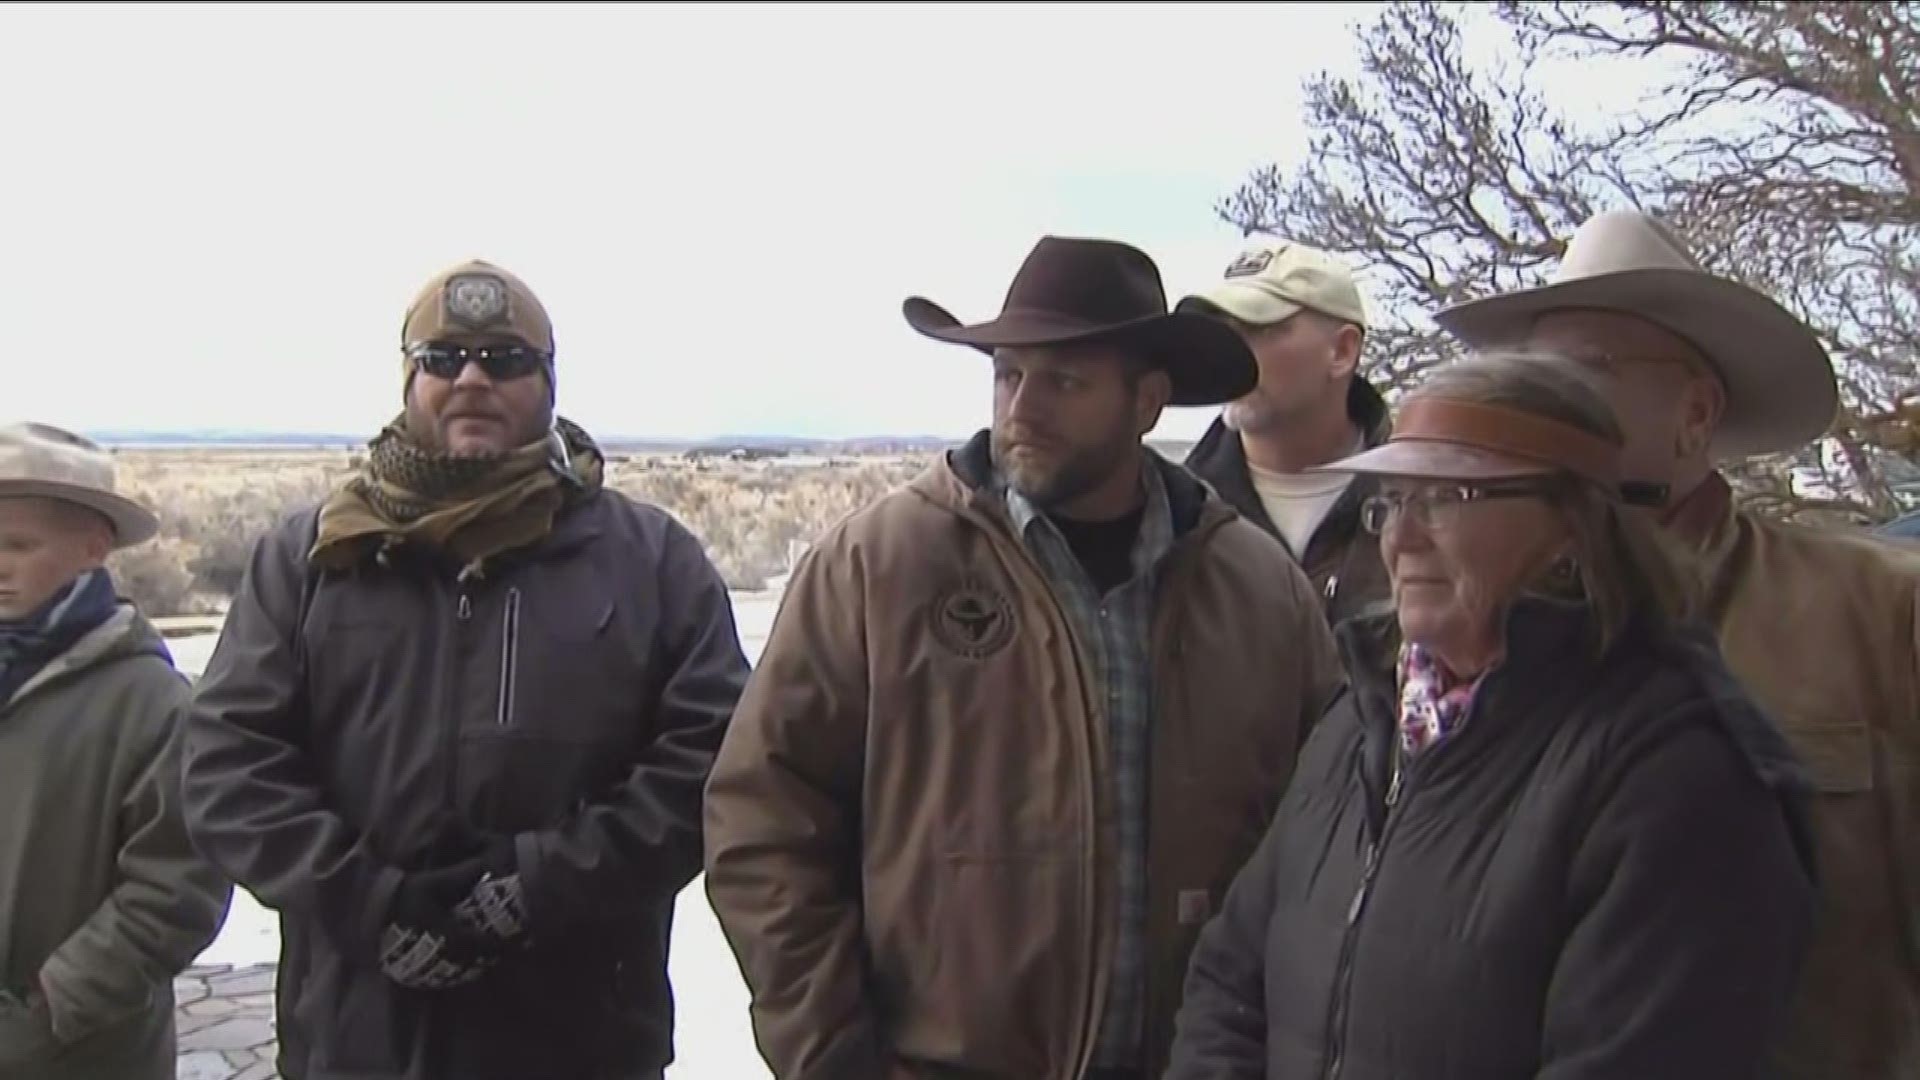 One of the leaders of the 2016 occupation of an Oregon wildlife refuge has been trying to buy a gun in Emmett, but has come up empty handed.